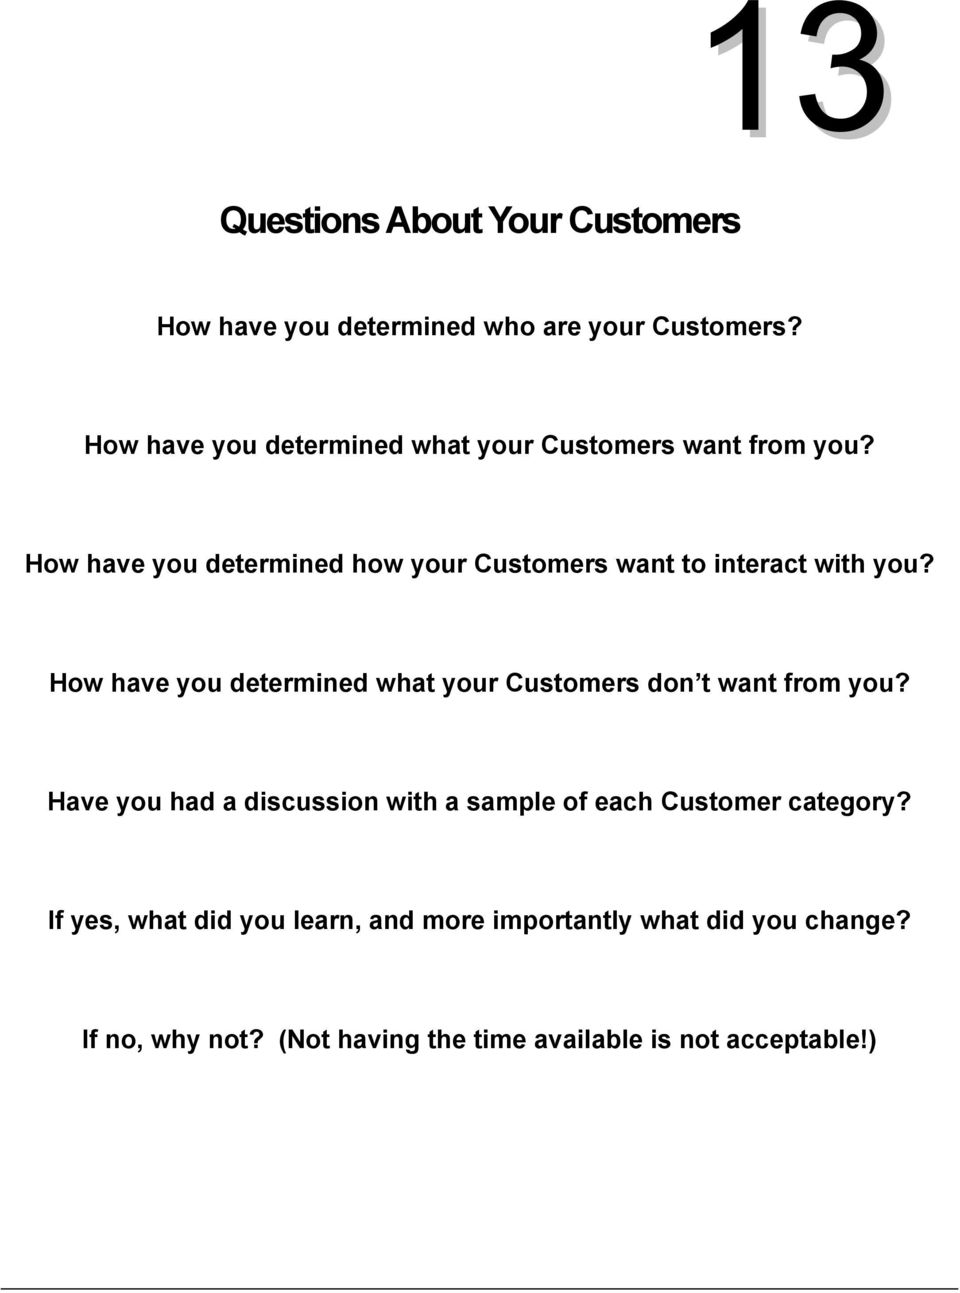 How have you determined how your Customers want to interact with you?